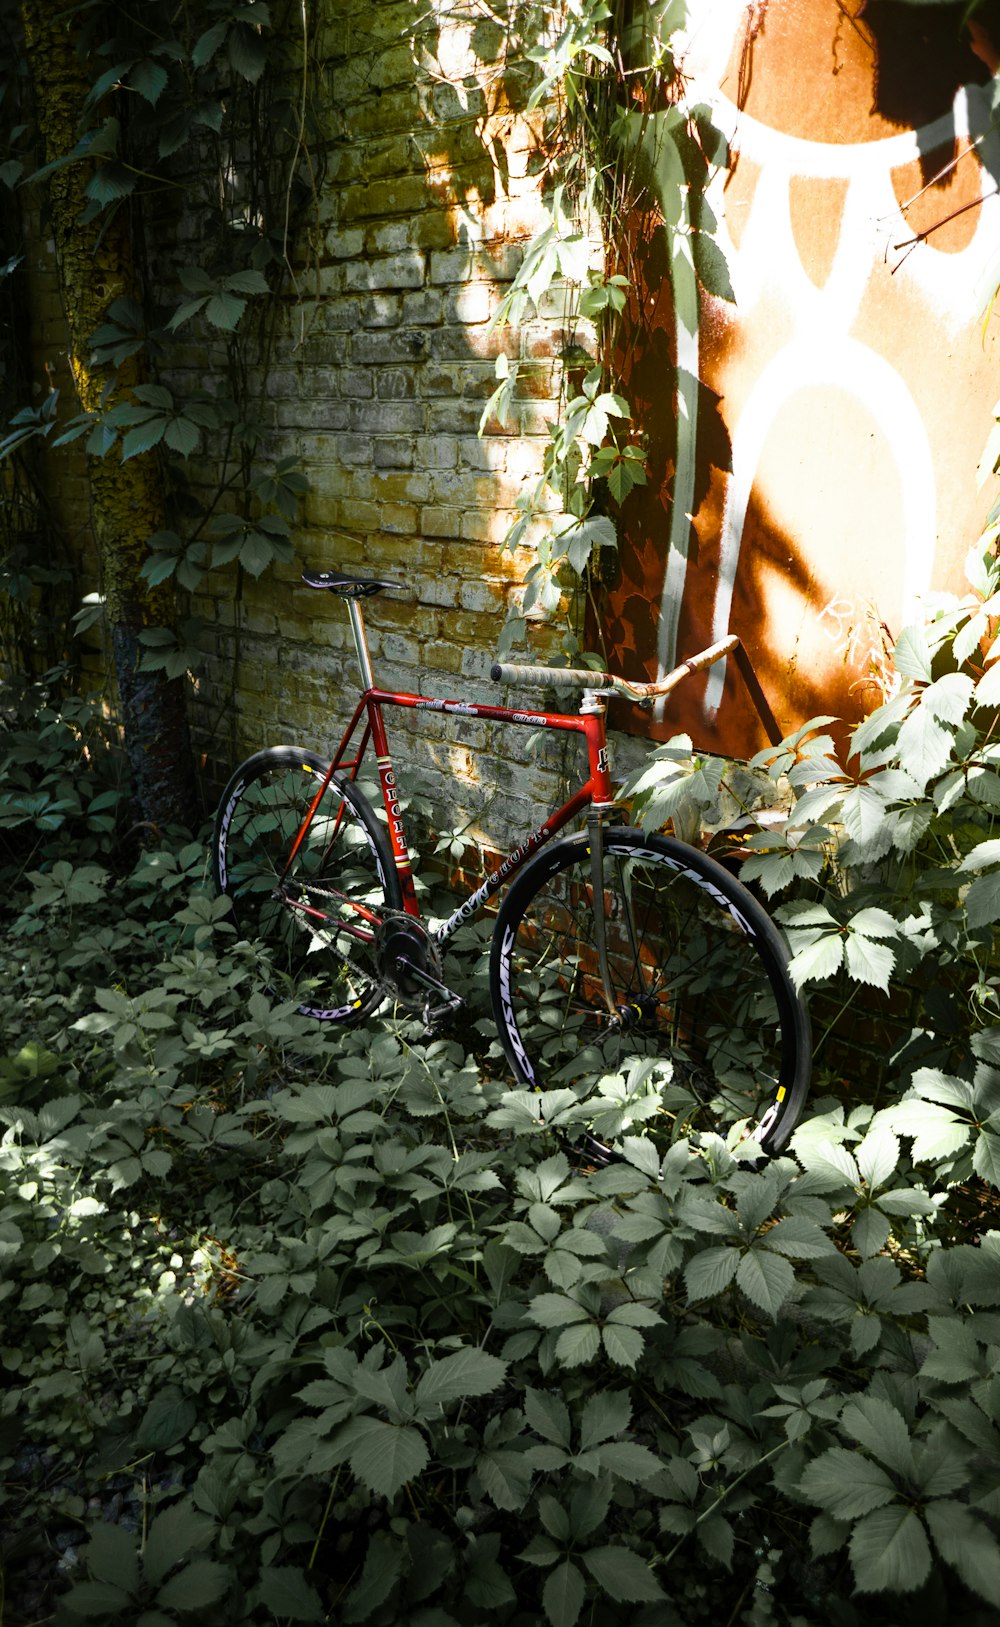 a bicycle parked in a garden